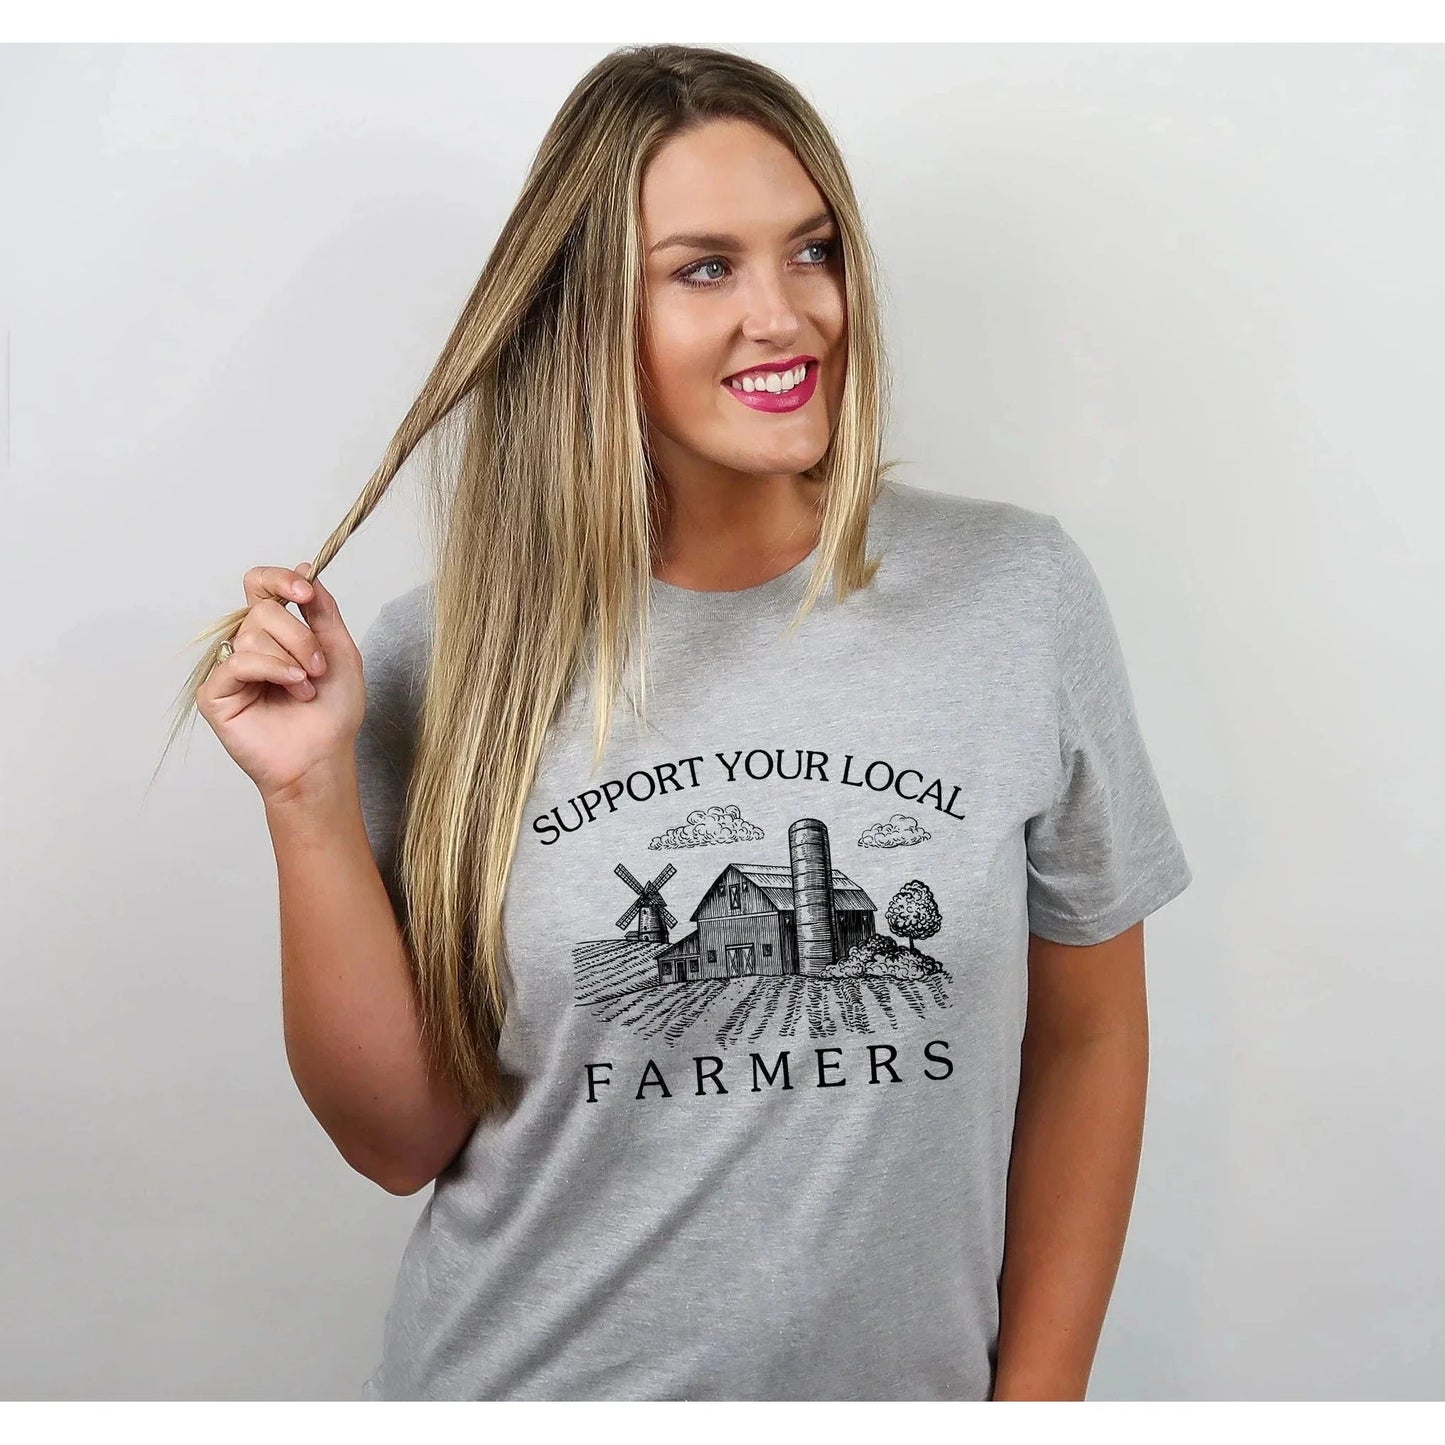 Support Your Local Farmers  Graphic Tee/Sweatshirt options